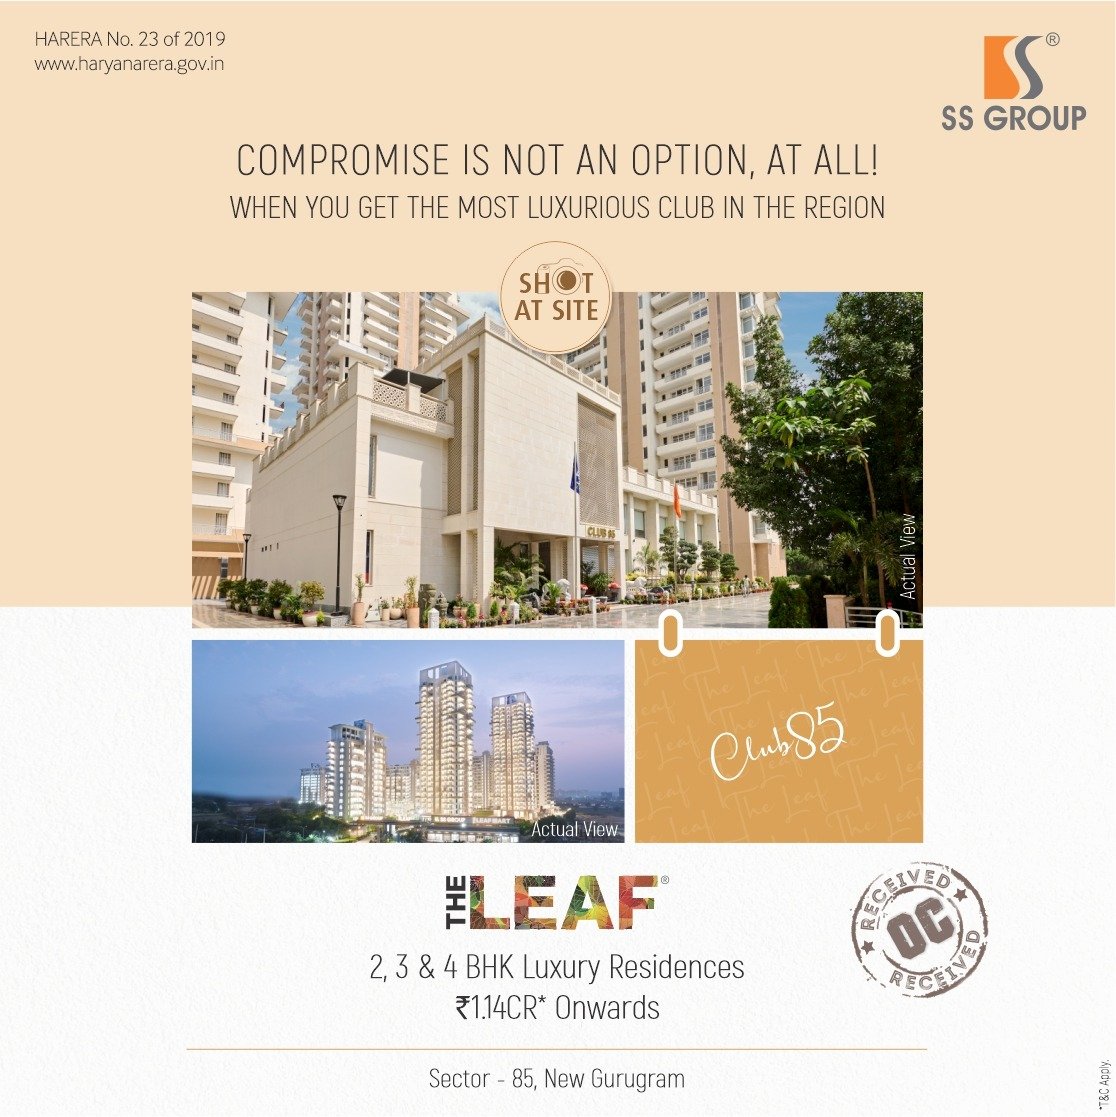 Book 2, 3 and 4 BHK luxury residences Rs 1.14 Cr owards at SS The Leaf, Gurgaon Update